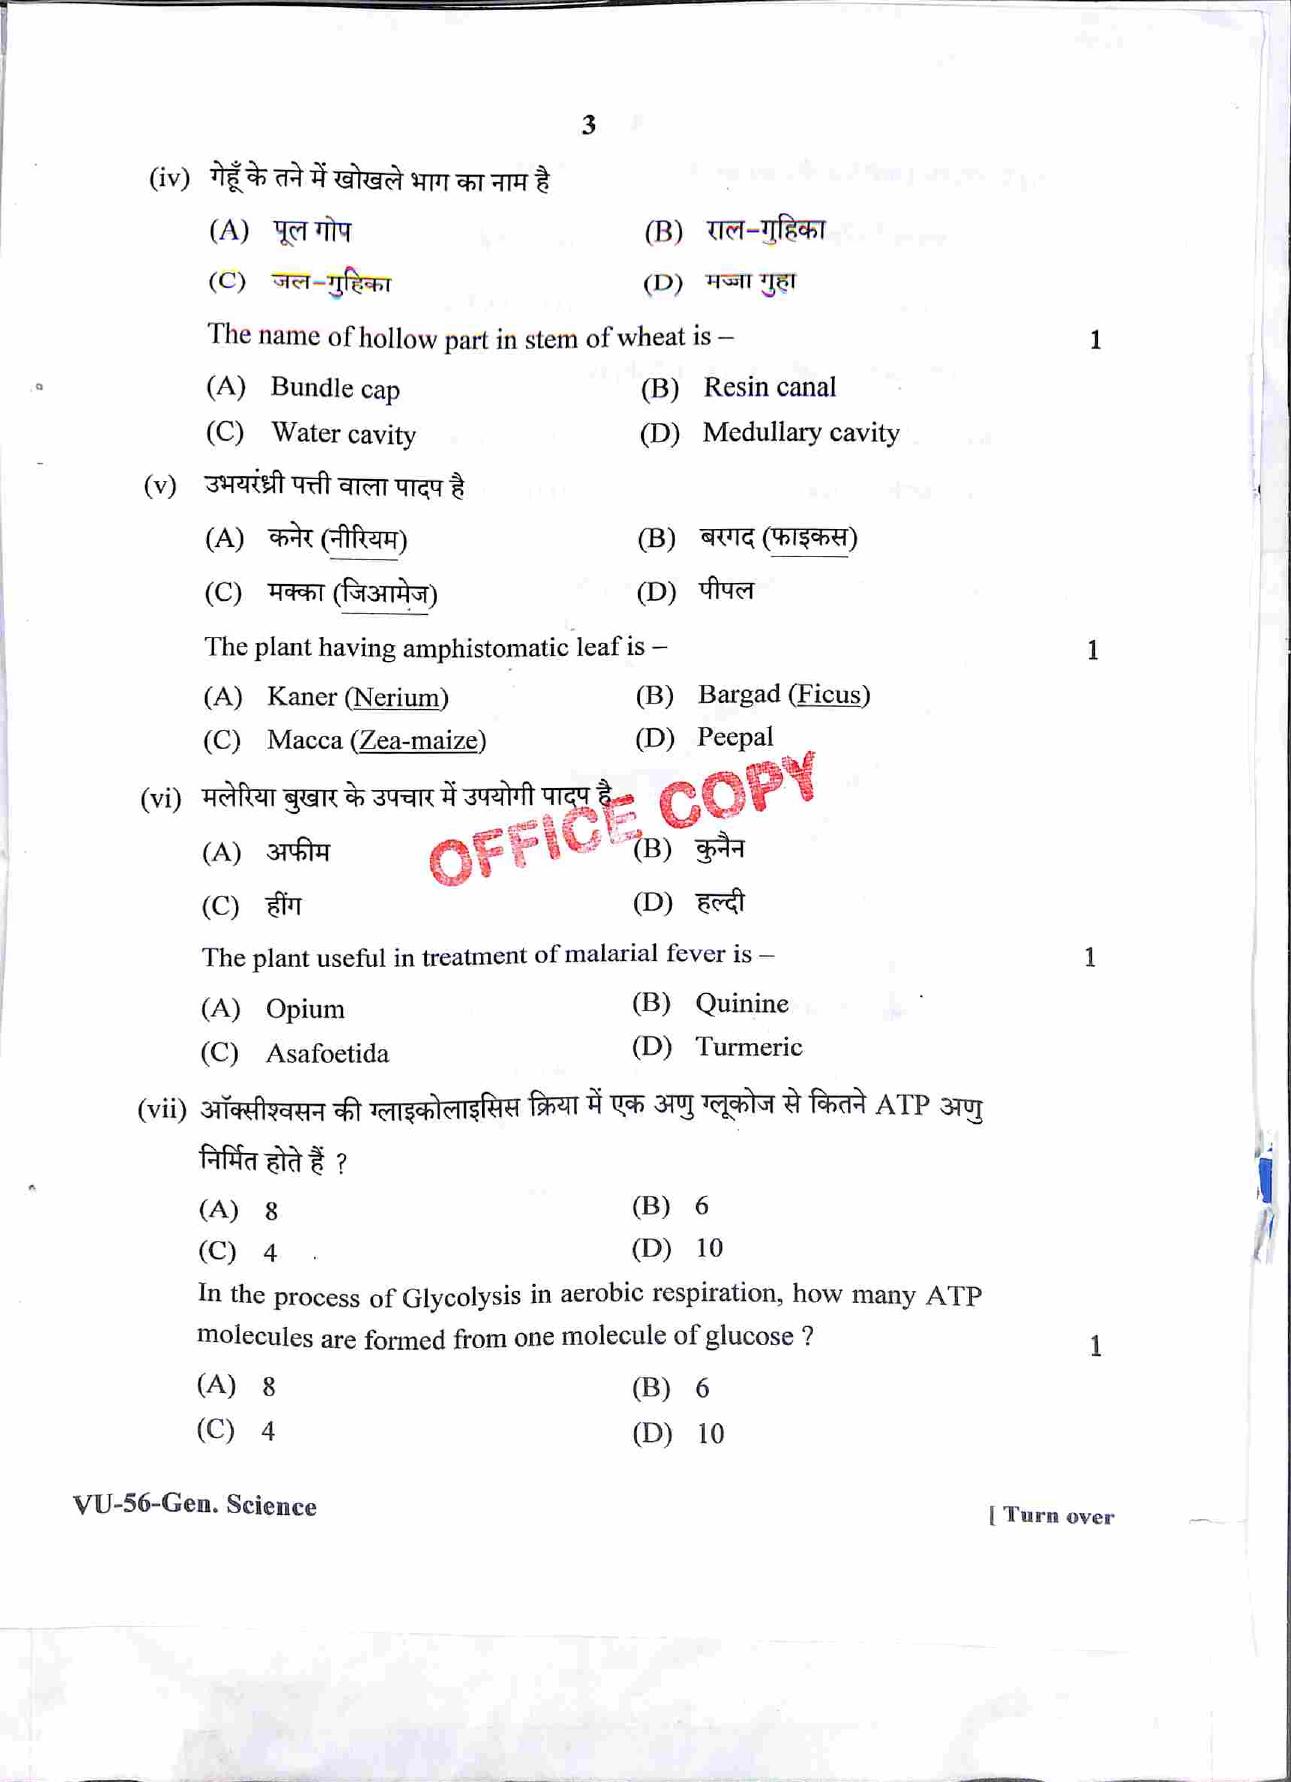 RBSE 2022 General Science Upadhyay Question Paper - Page 4